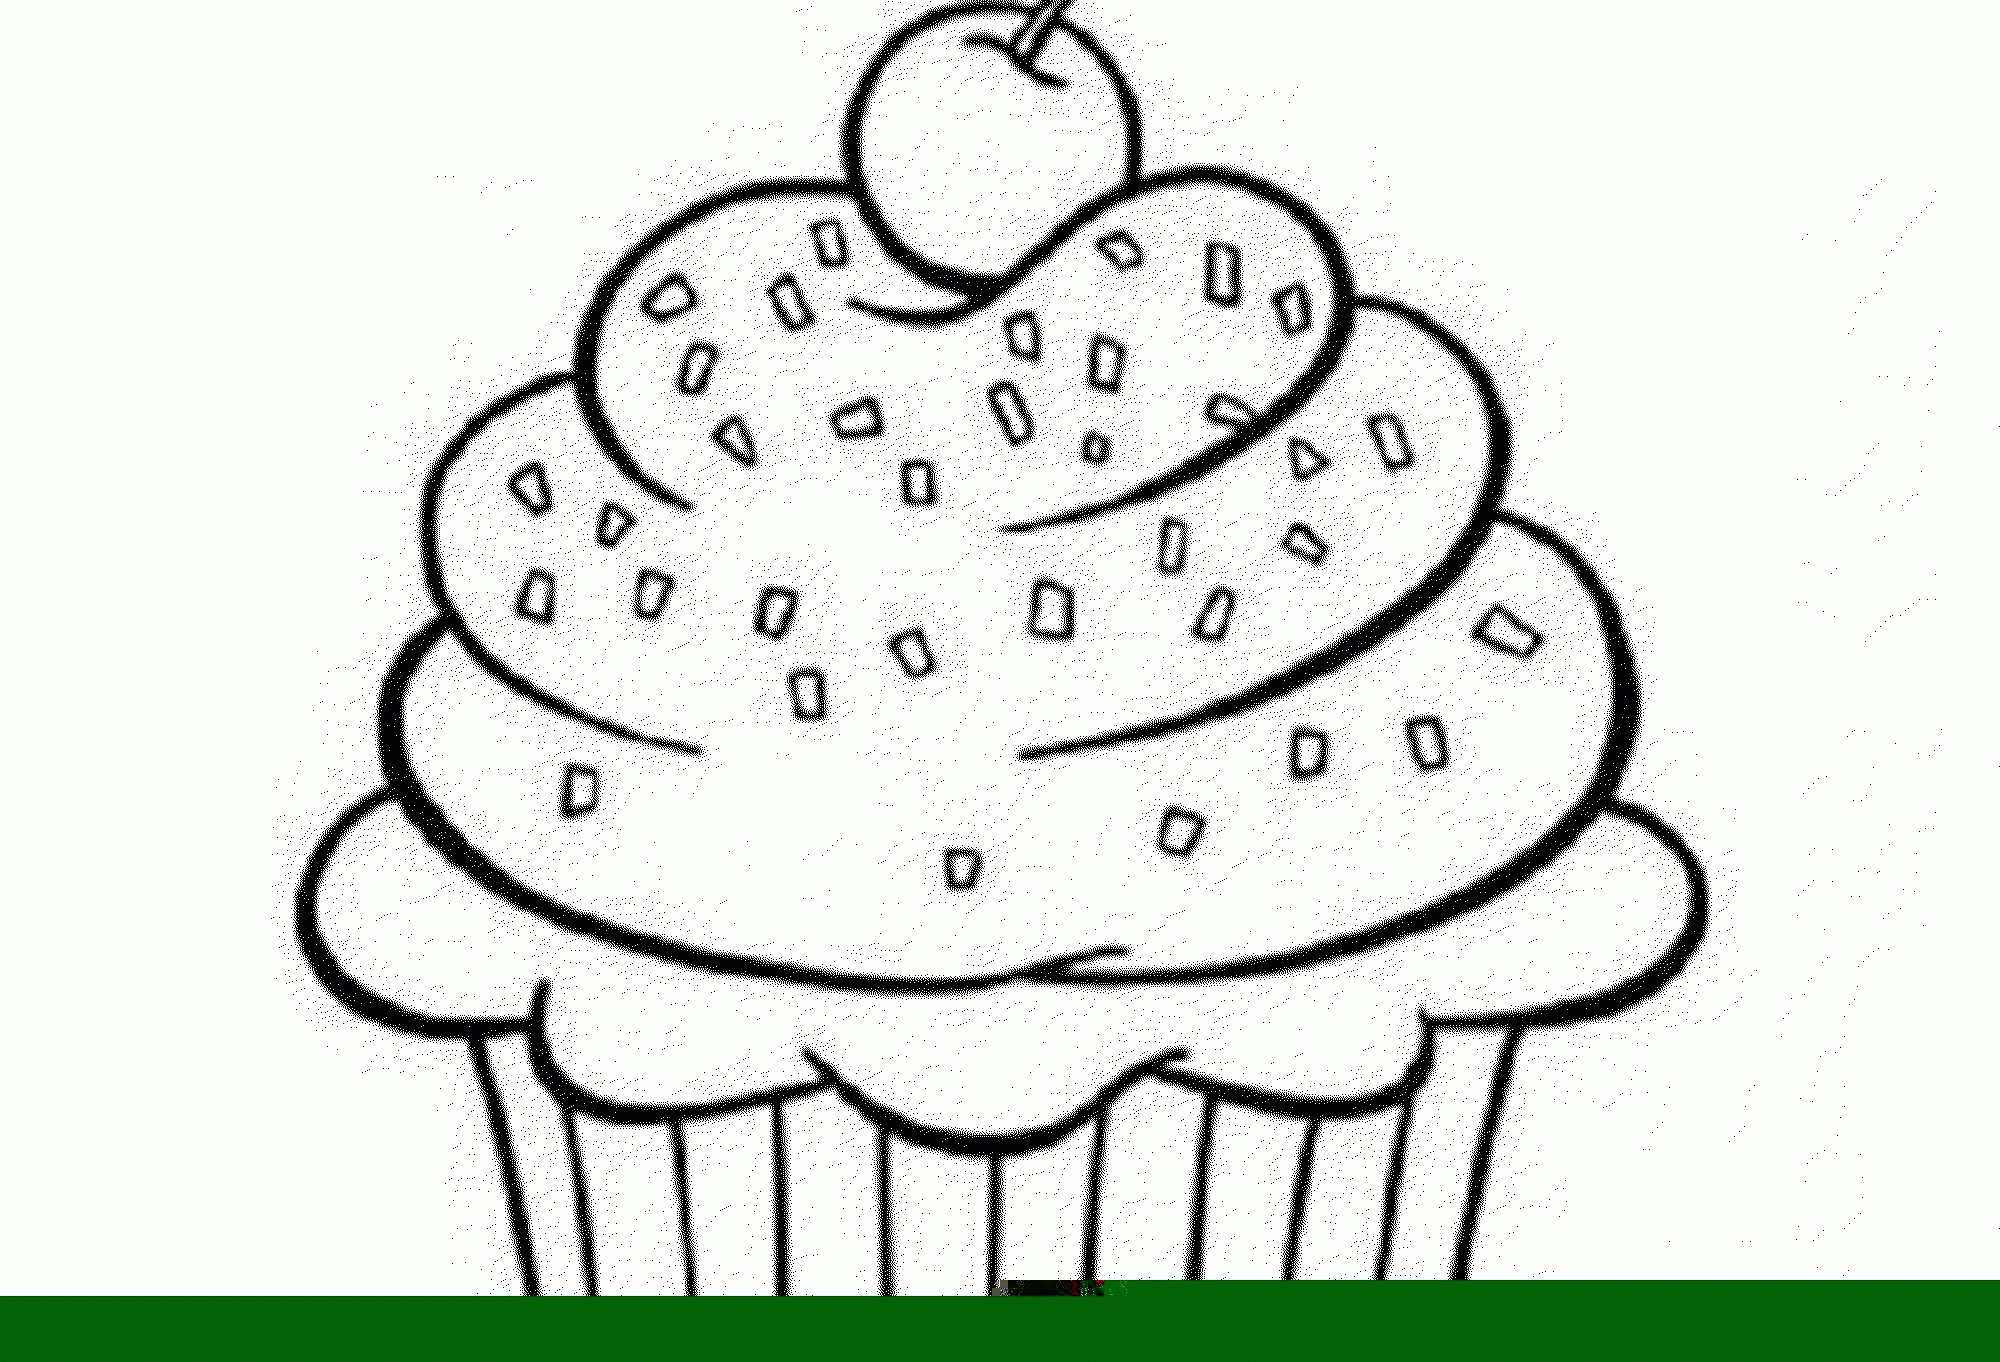 Get Free Printable Cupcake| Coloring Pages for Kids 